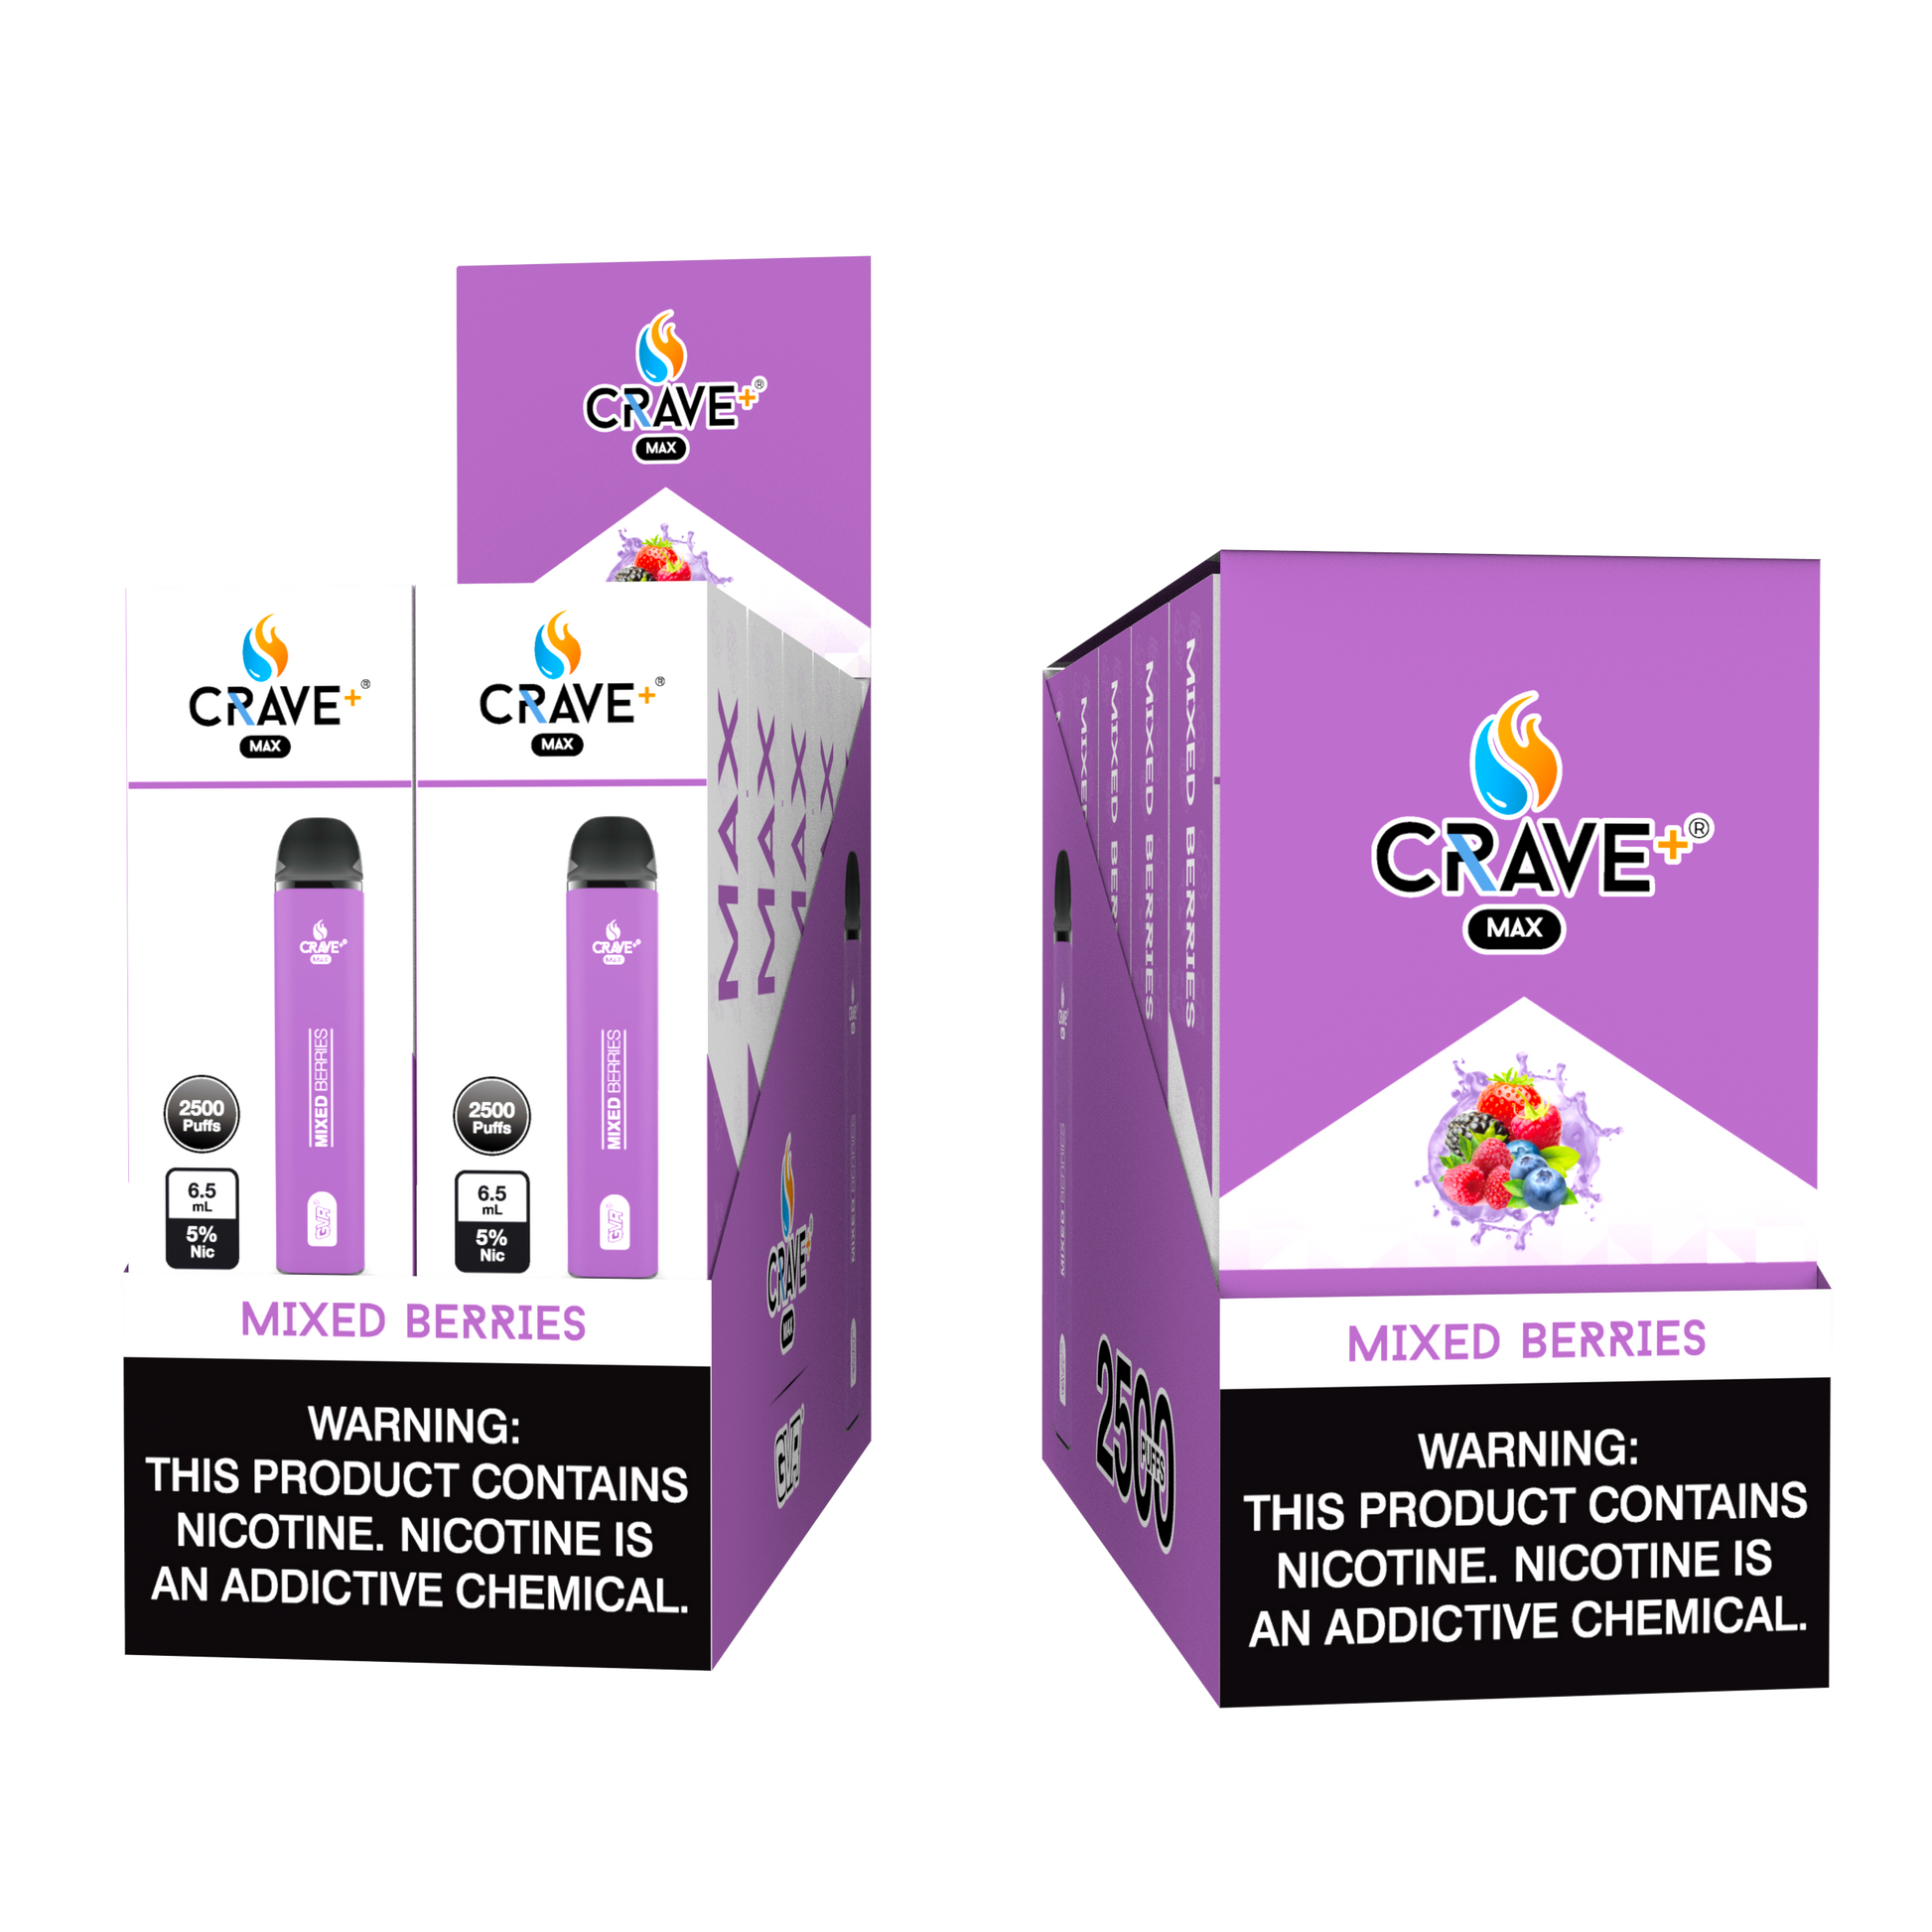 crave max, crave vape, buy crave max, crave max for sale, crave max flavors, crave flavors vape, buy crave vape online, crave max gvr, crave 2500 puffs, crave max mixed berries, crave mixed berries, mixed berries crave max, mix berries crave, crave max disposable 2500 puffs, crave max bulk, crave disposable bulk, crave max vape, vape szn, vapeszn, crave max mixed berries for sale